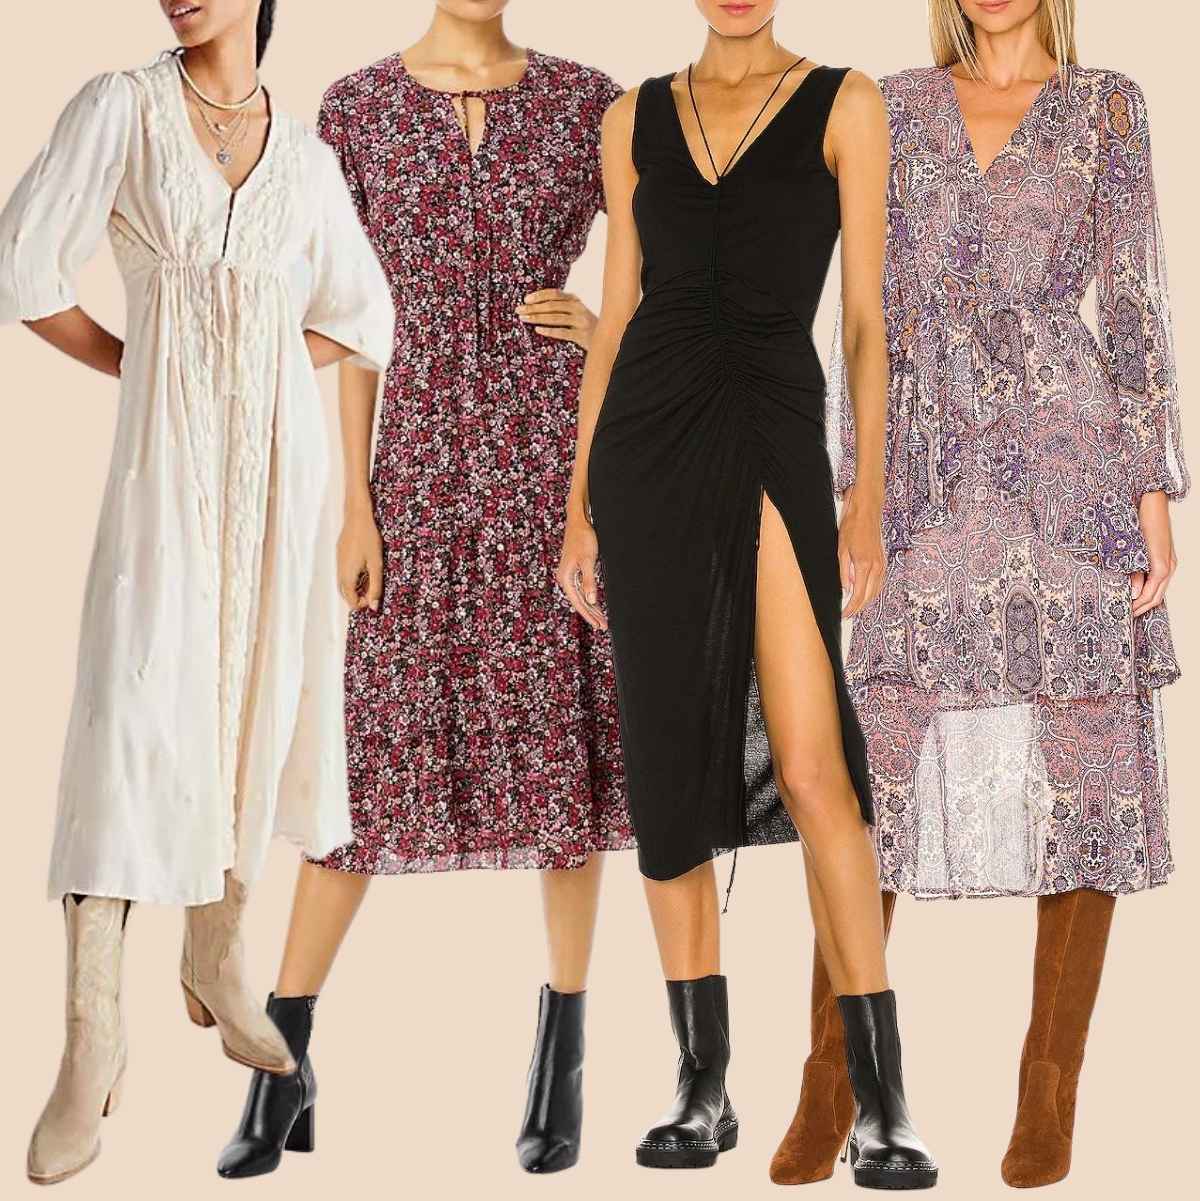 Collage of 4 women wearing different boots with midi dresses.